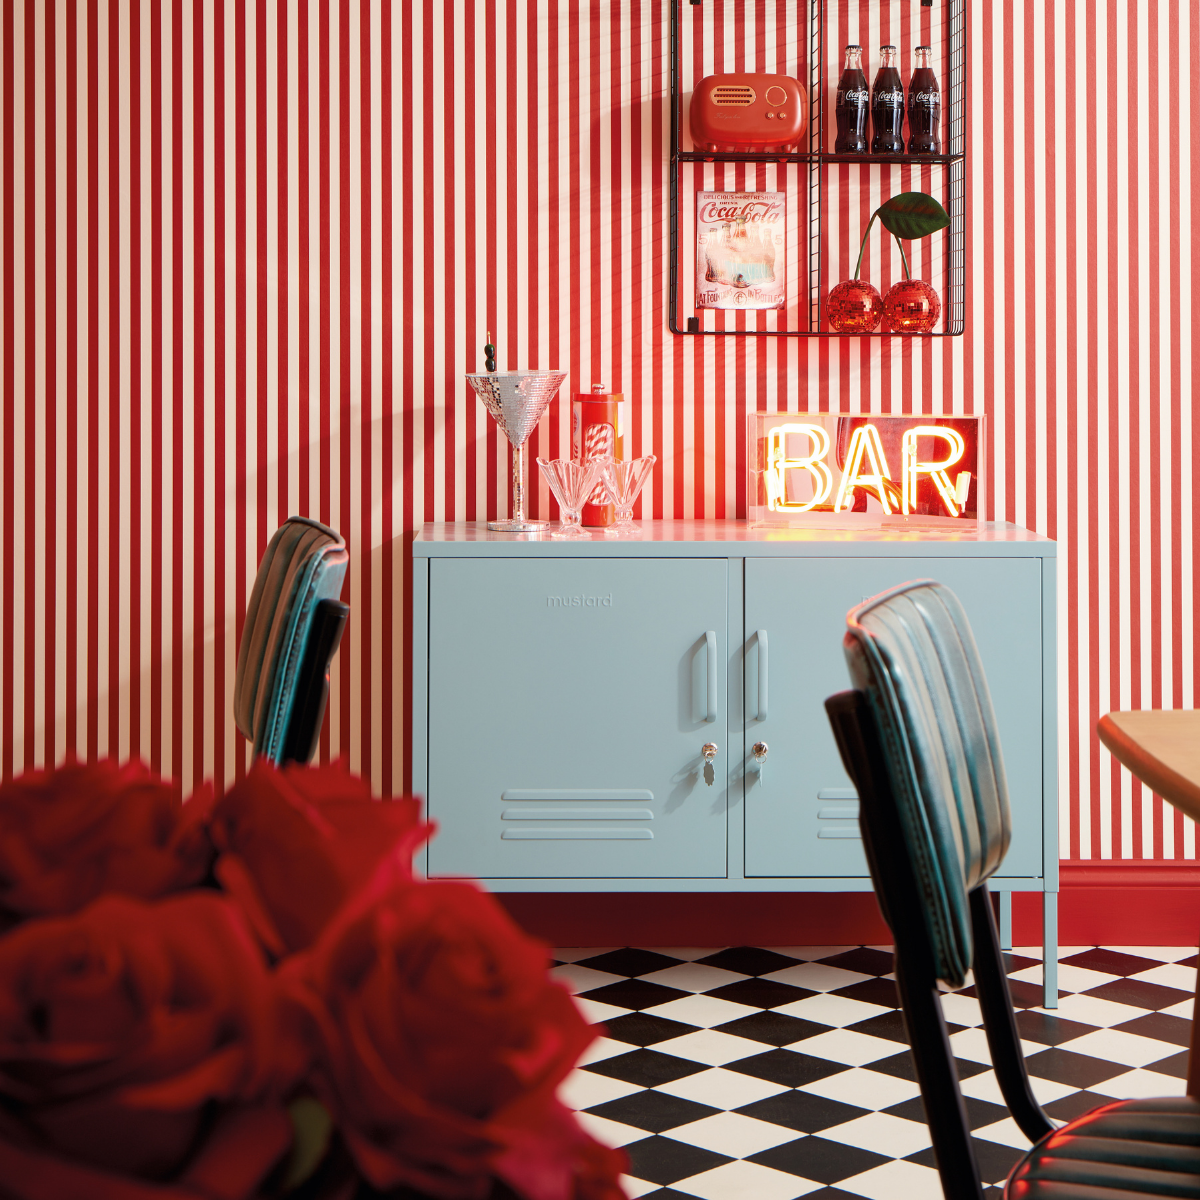 An Ocean Lowdown acts as a bar cabinet in a room with red and white candy-striped wallpaper. There is a red neon bar sign and vintage styling including coke bottles and harlequin flooring.